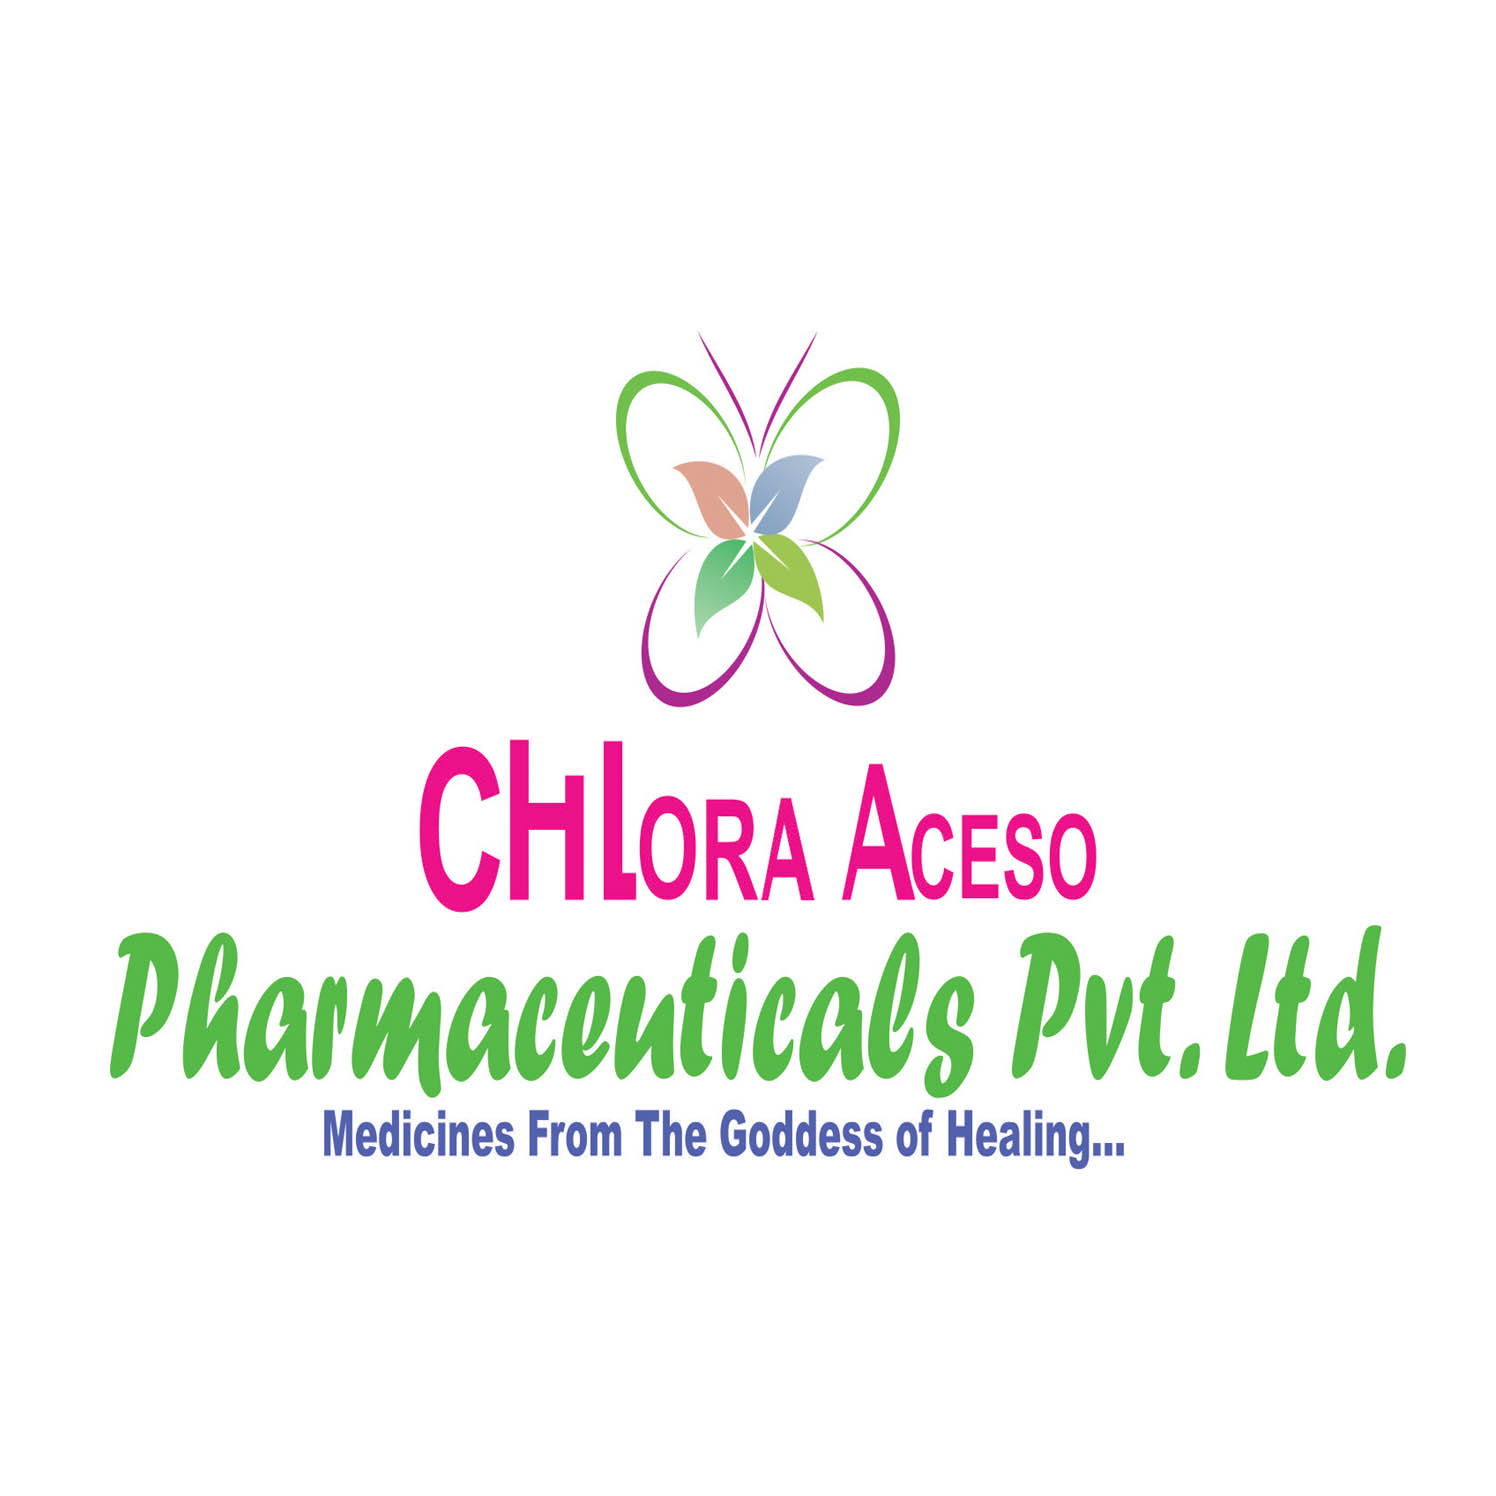 Top Third Party Pharma Manufacturer in India